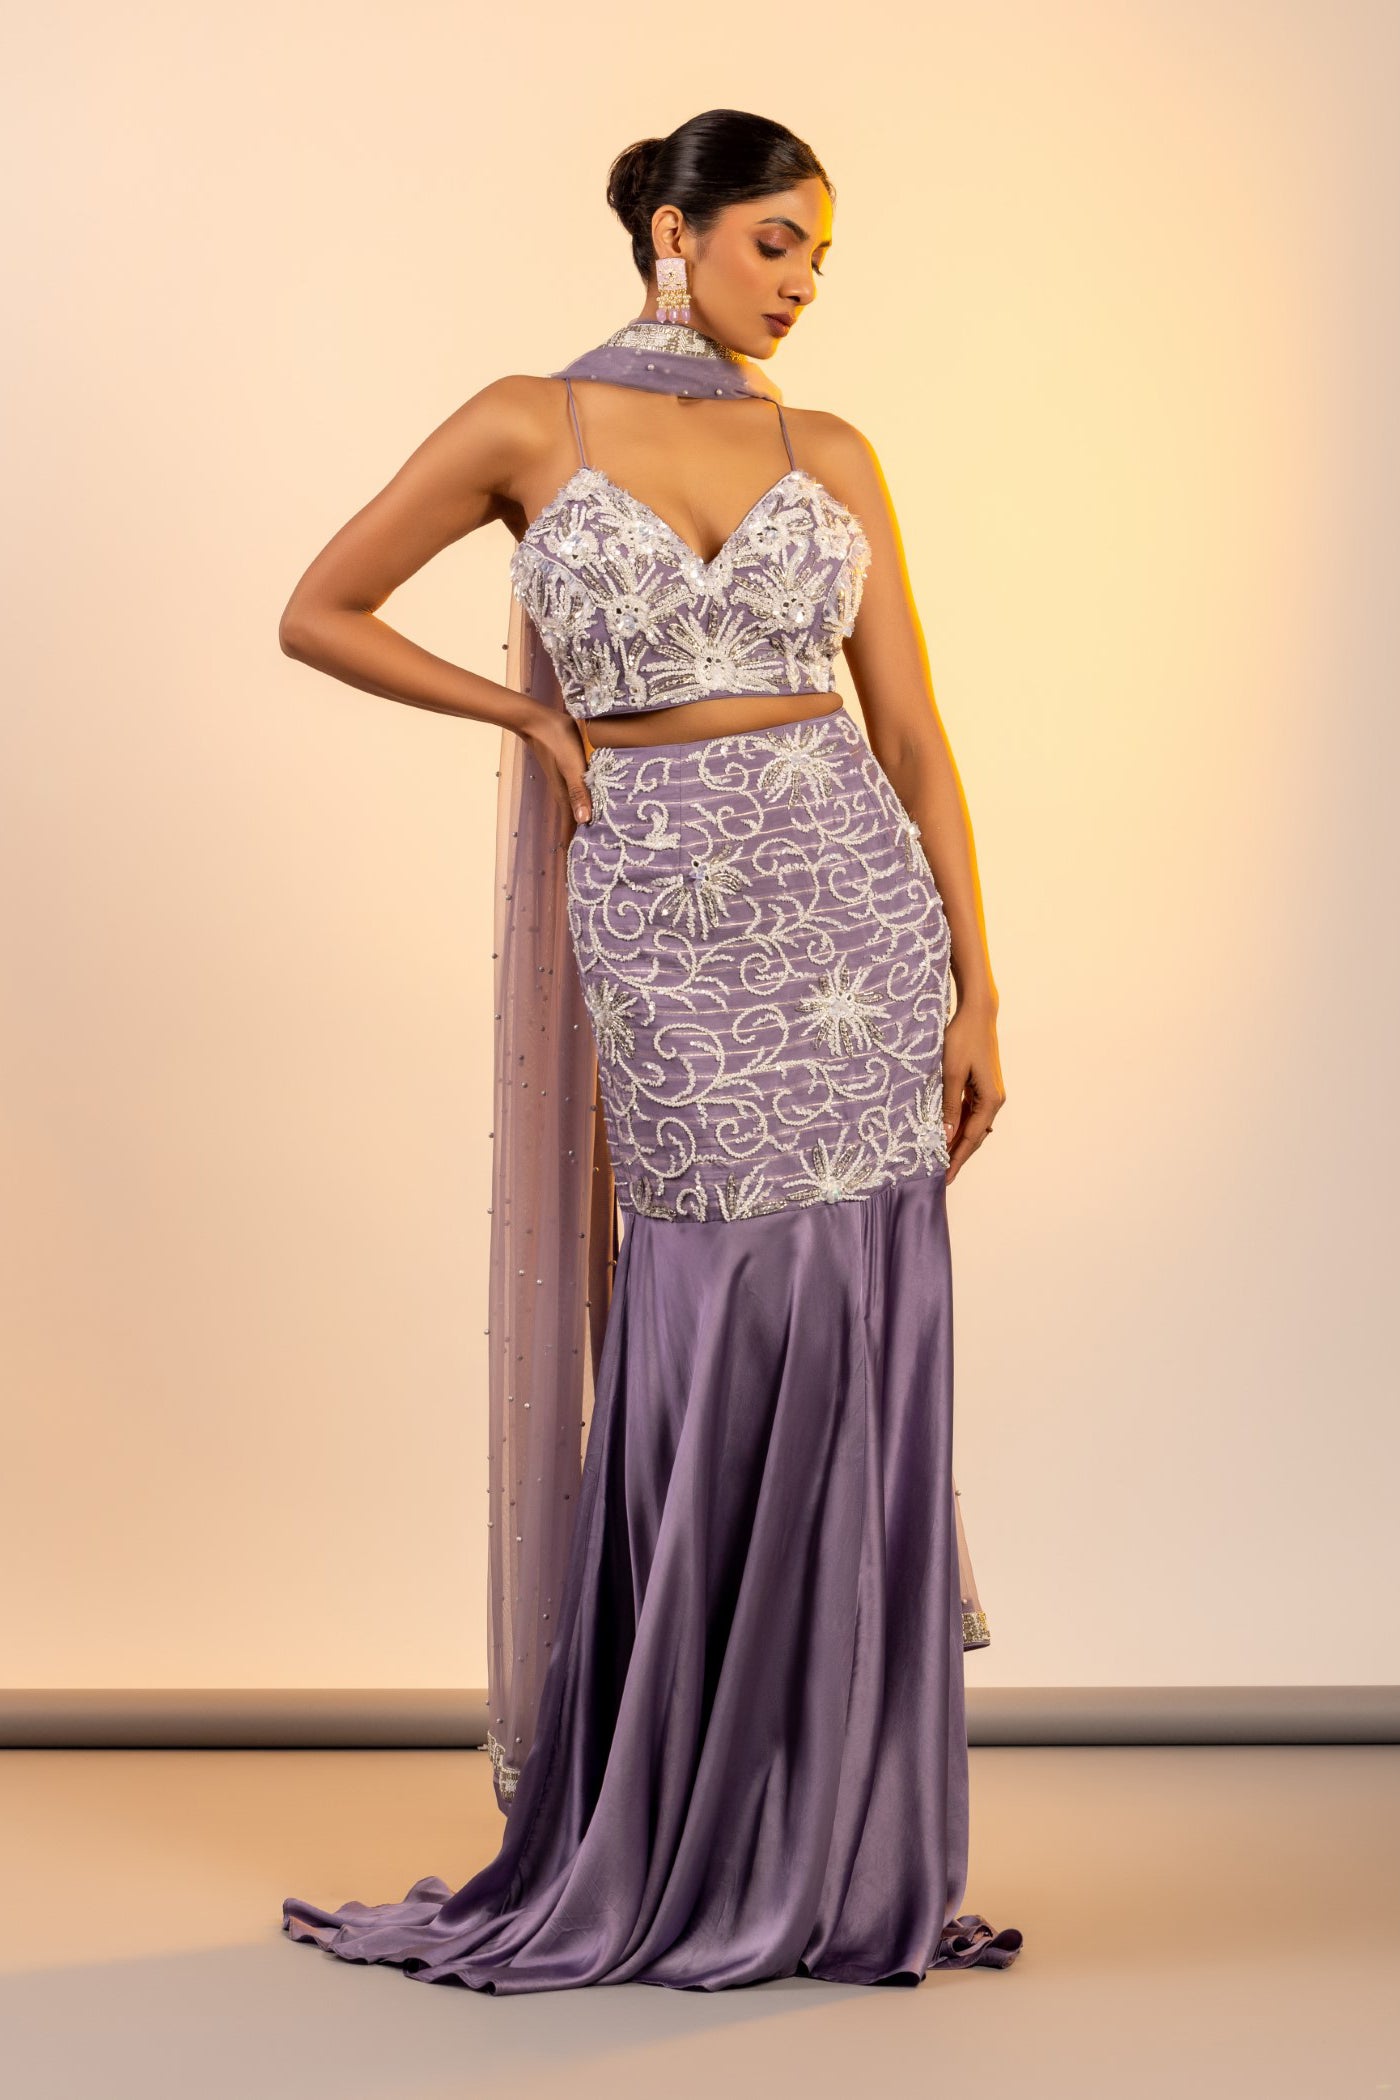 Lavendar crop top and skirt with cutdana